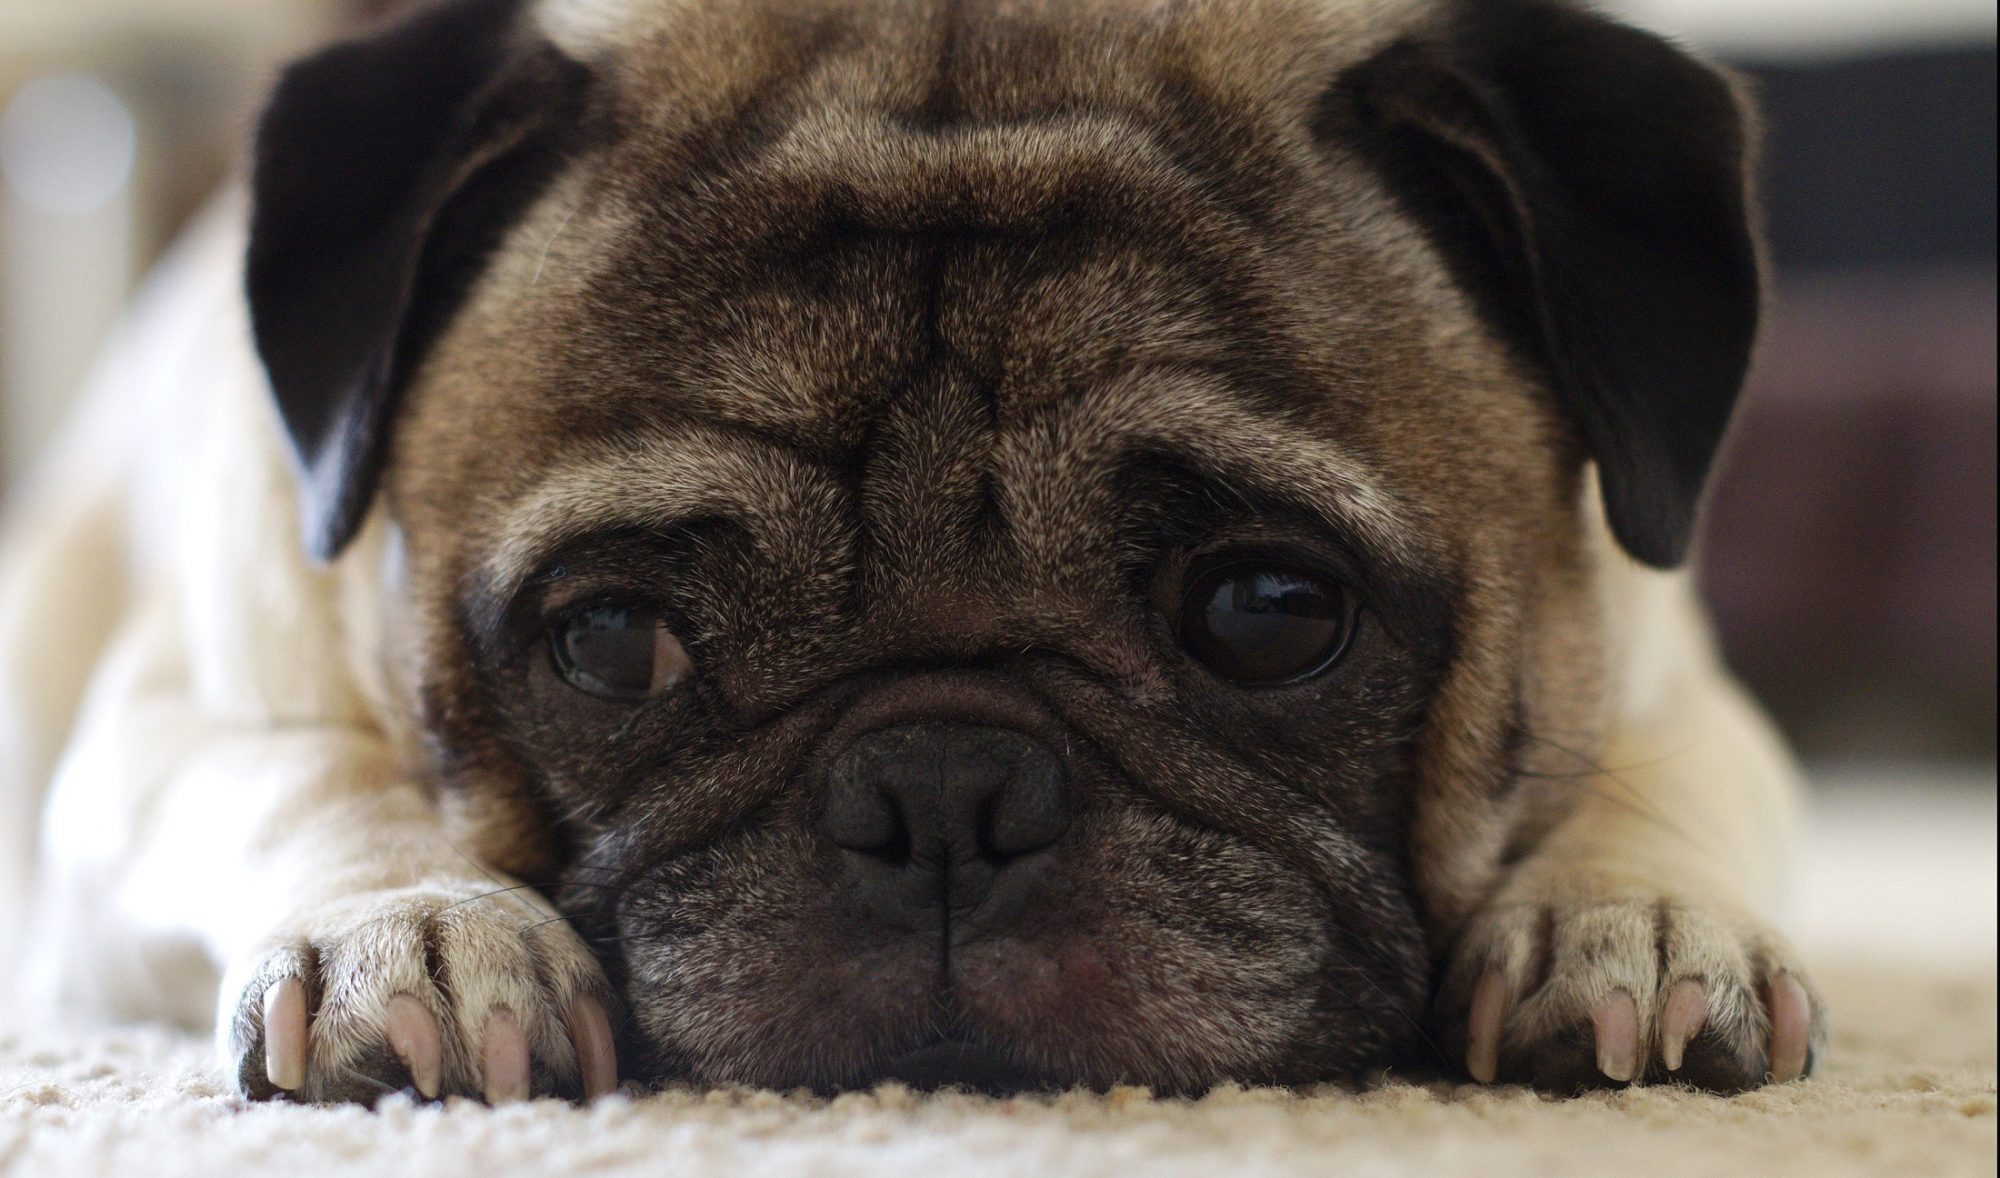 A pug laying on a carpet